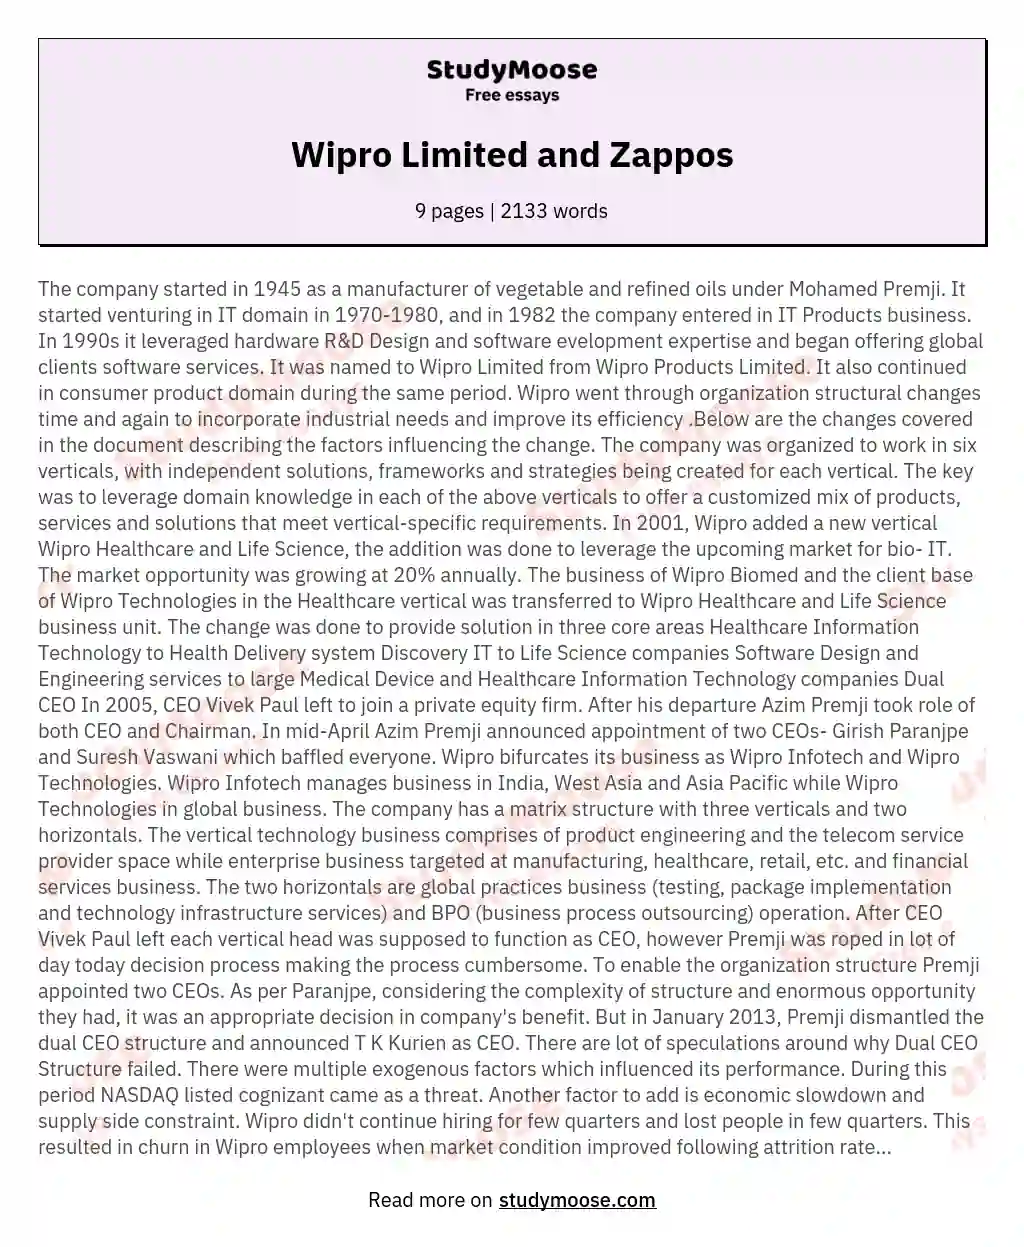 Wipro Limited and Zappos essay